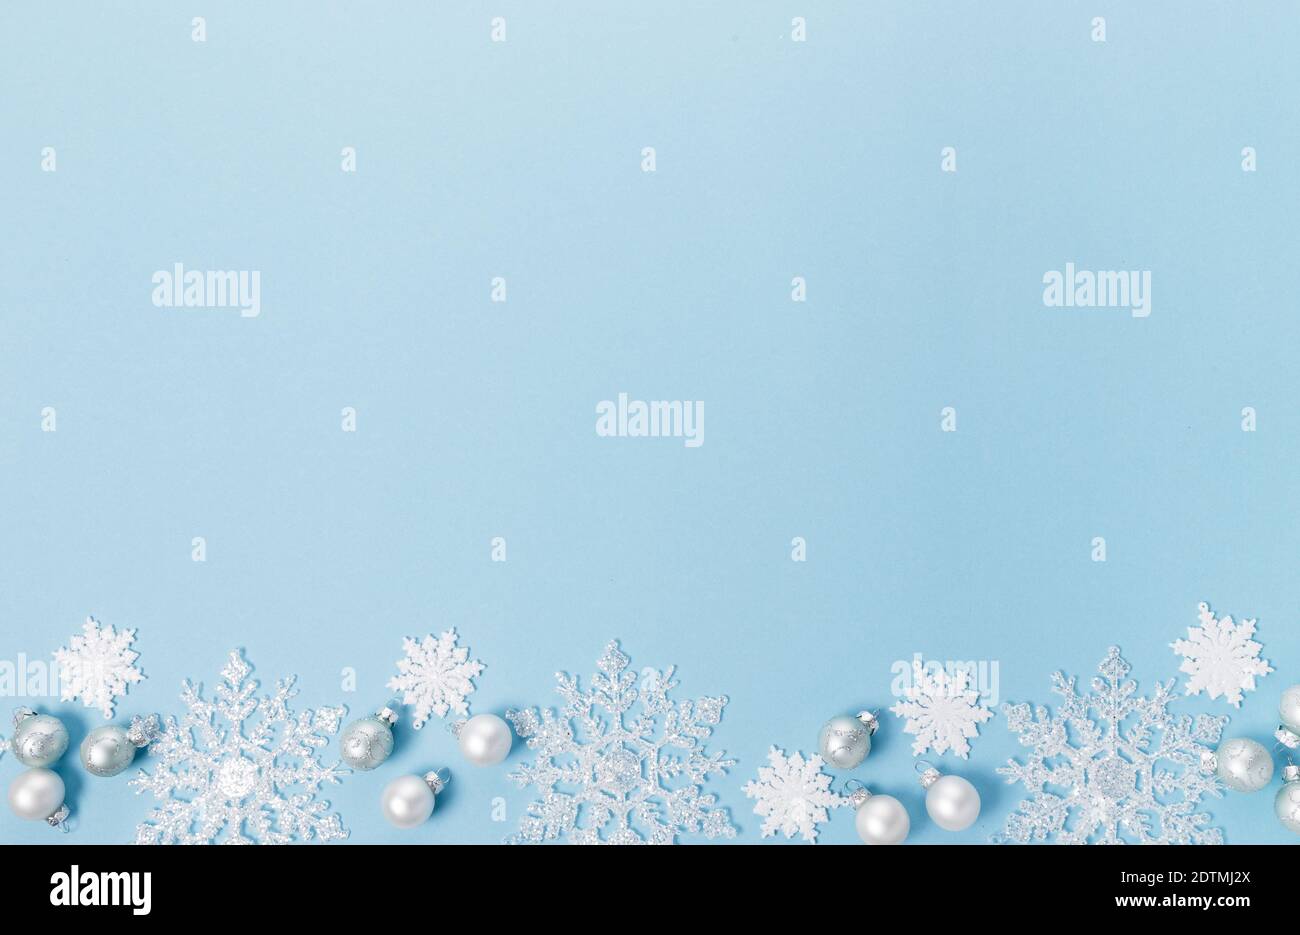 Blue Christmas holiday composition. Festive creative white pattern, xmas decor holiday ball with snowflakes on blue background. Stock Photo